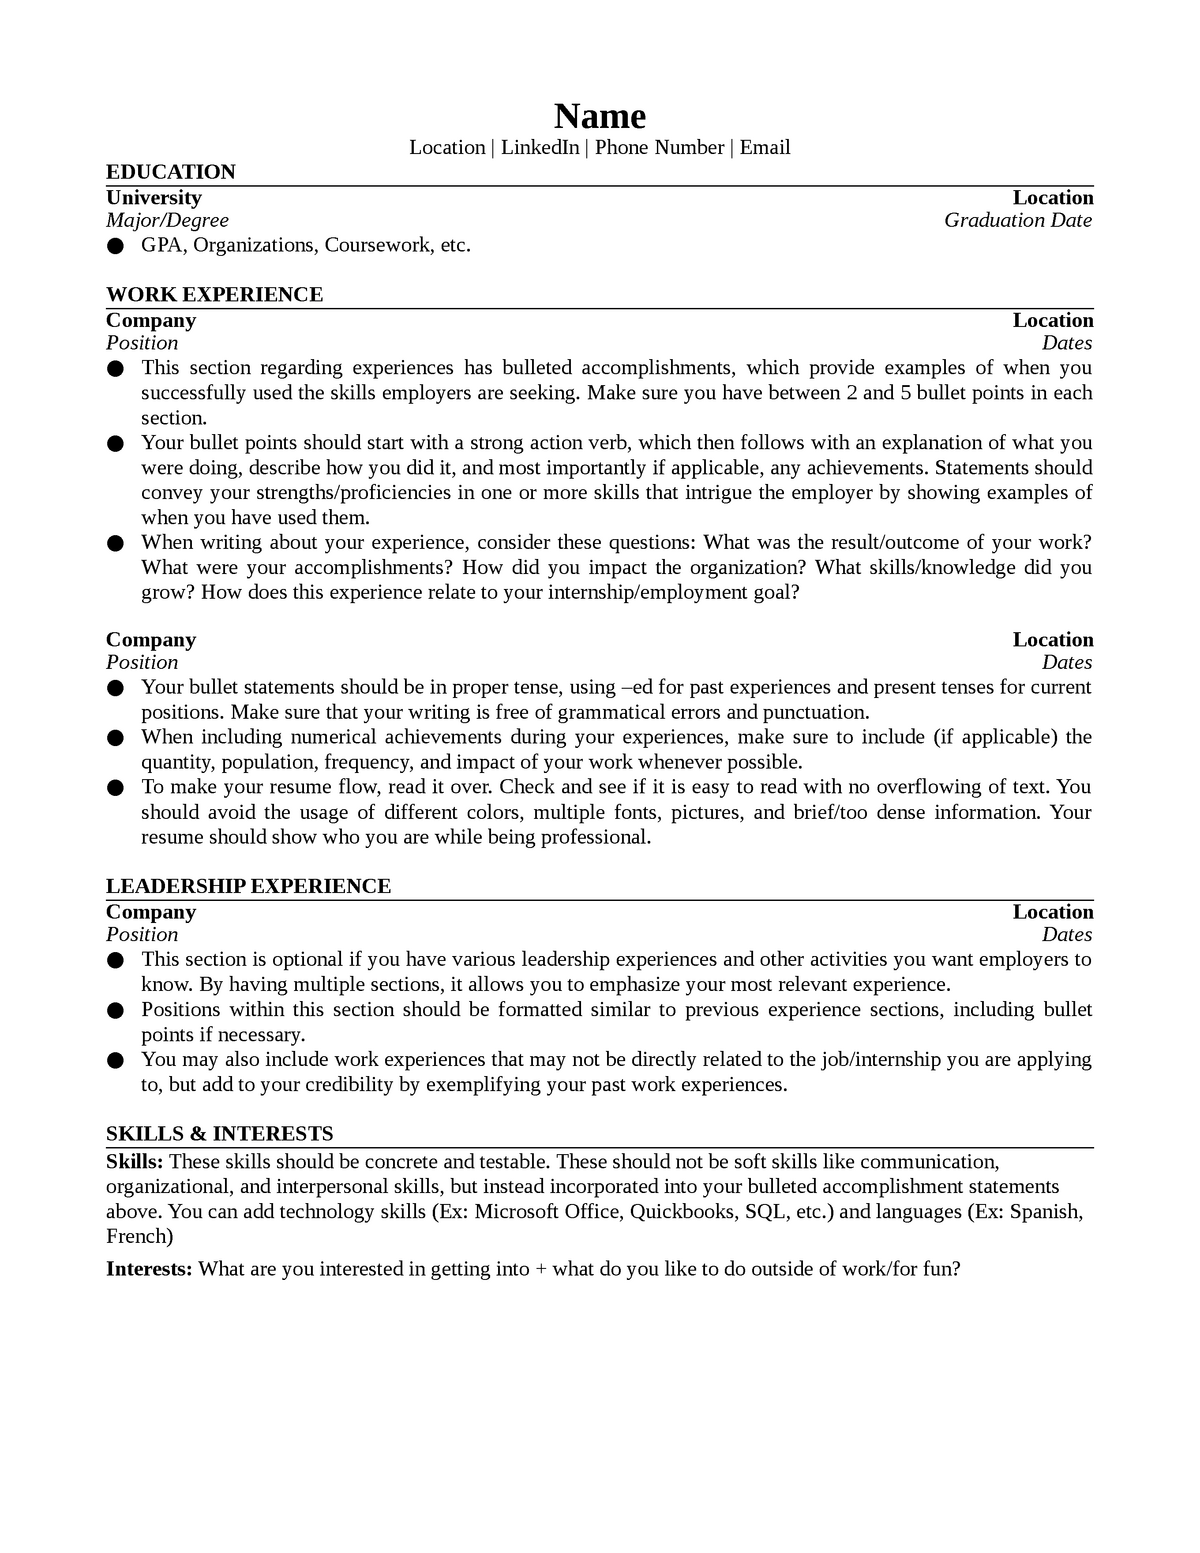 Wonsulting Resume Template Career Example Name Location LinkedIn